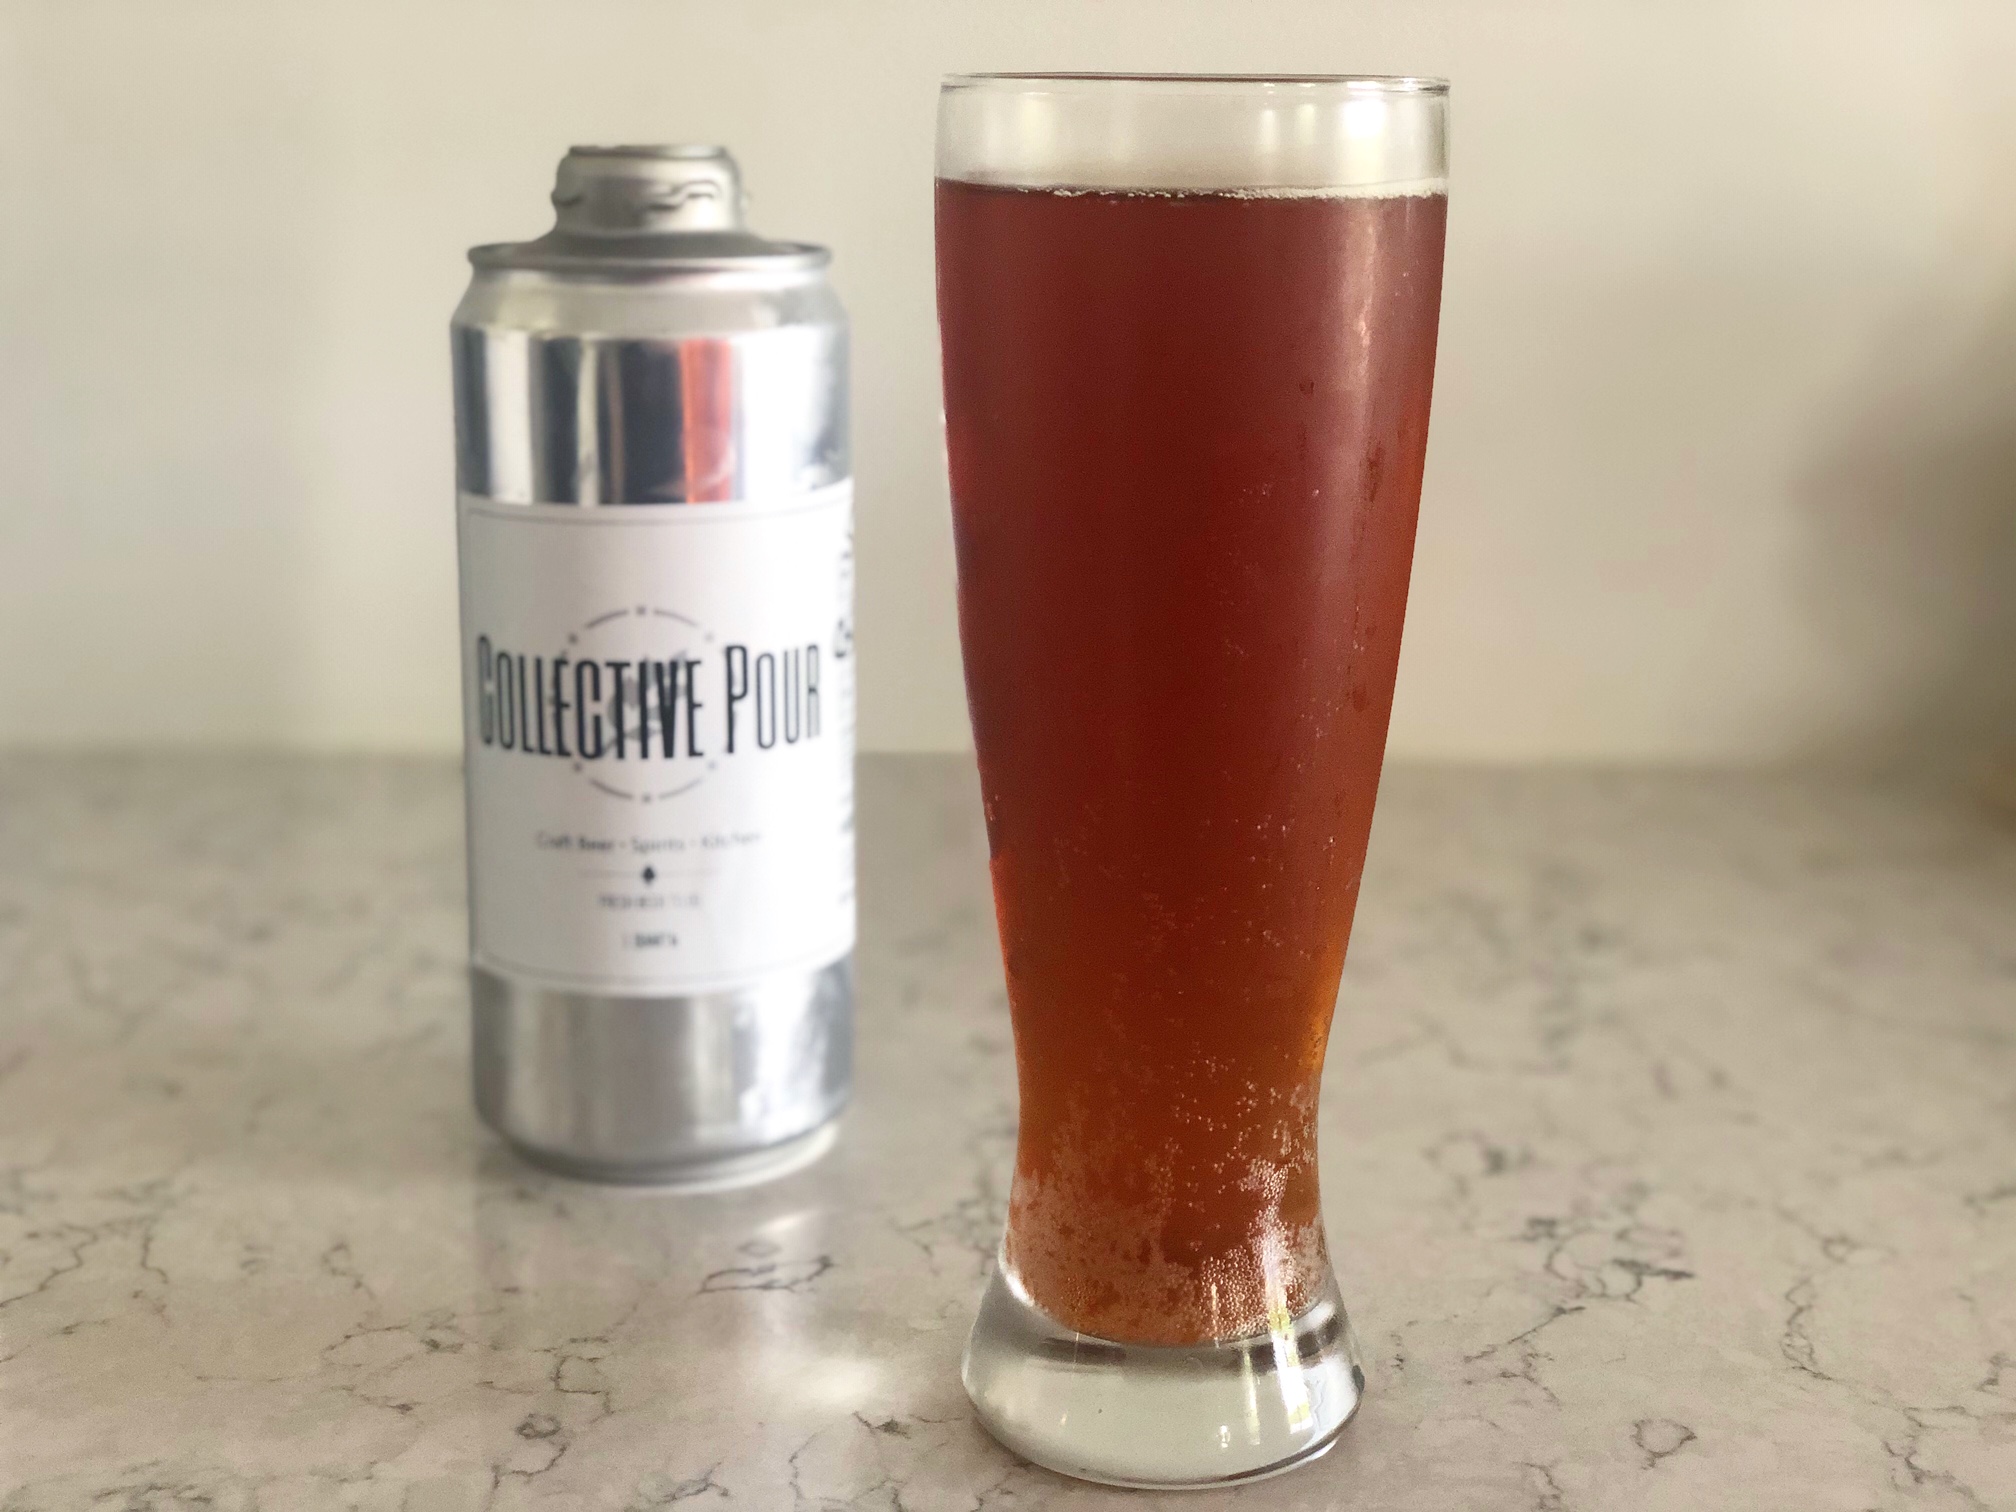 A silver crowler from Collective Pour is next to a burnt orange lager poured into a tall beer glass on a marbled counter. Photo by Alyssa Buckley.